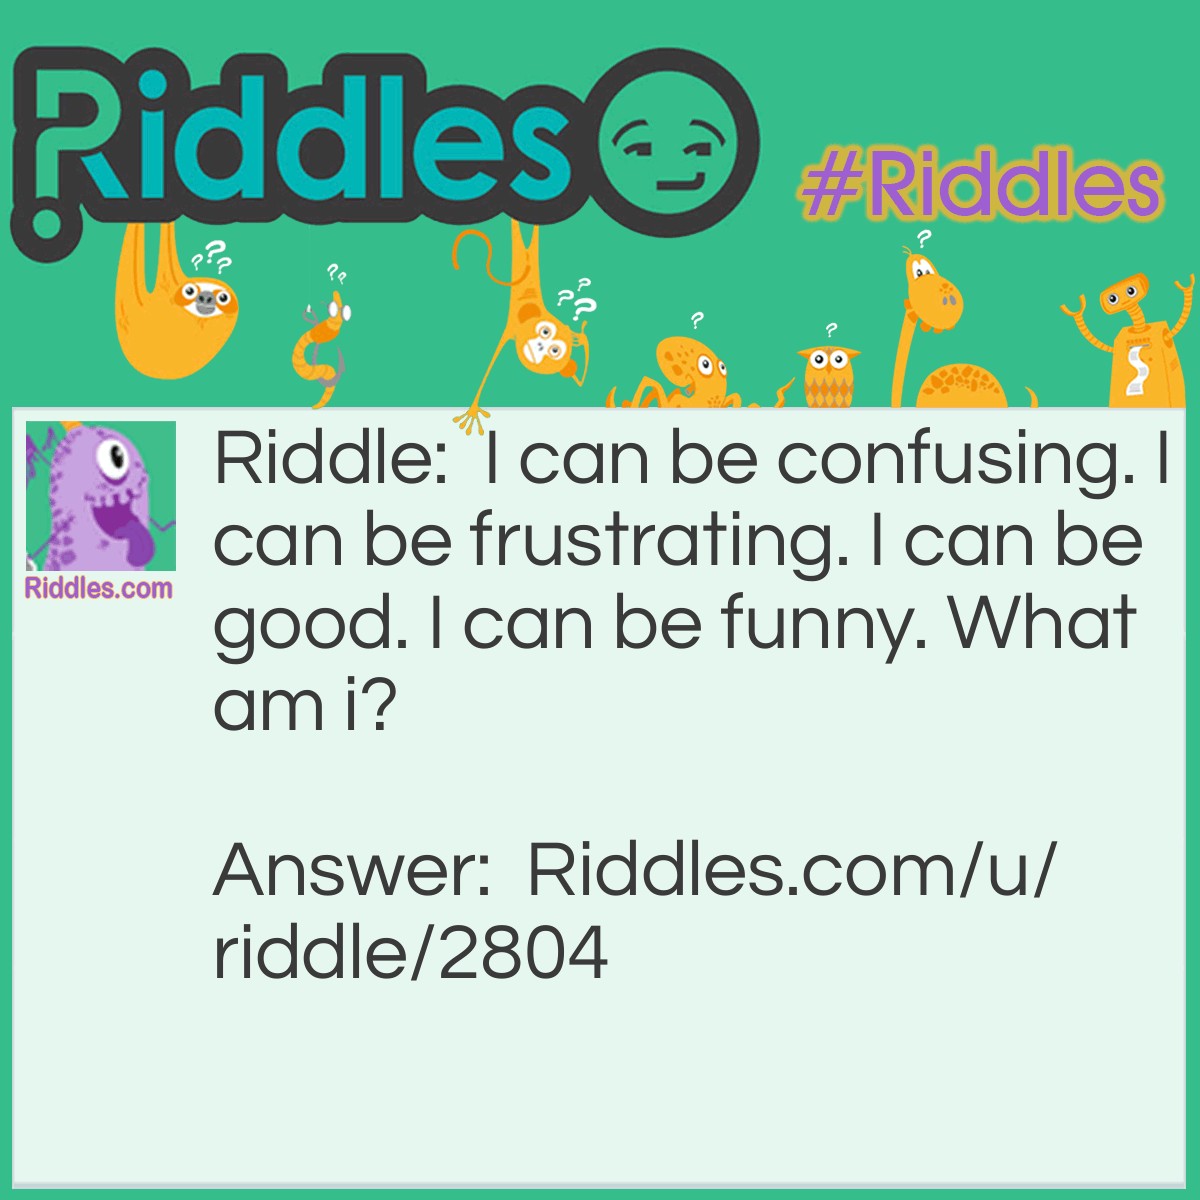 Riddle: I can be confusing. I can be frustrating. I can be good. I can be <a title="Funny Riddles" href="../../../funny-riddles">funny</a>. What am I? Answer: A riddle.